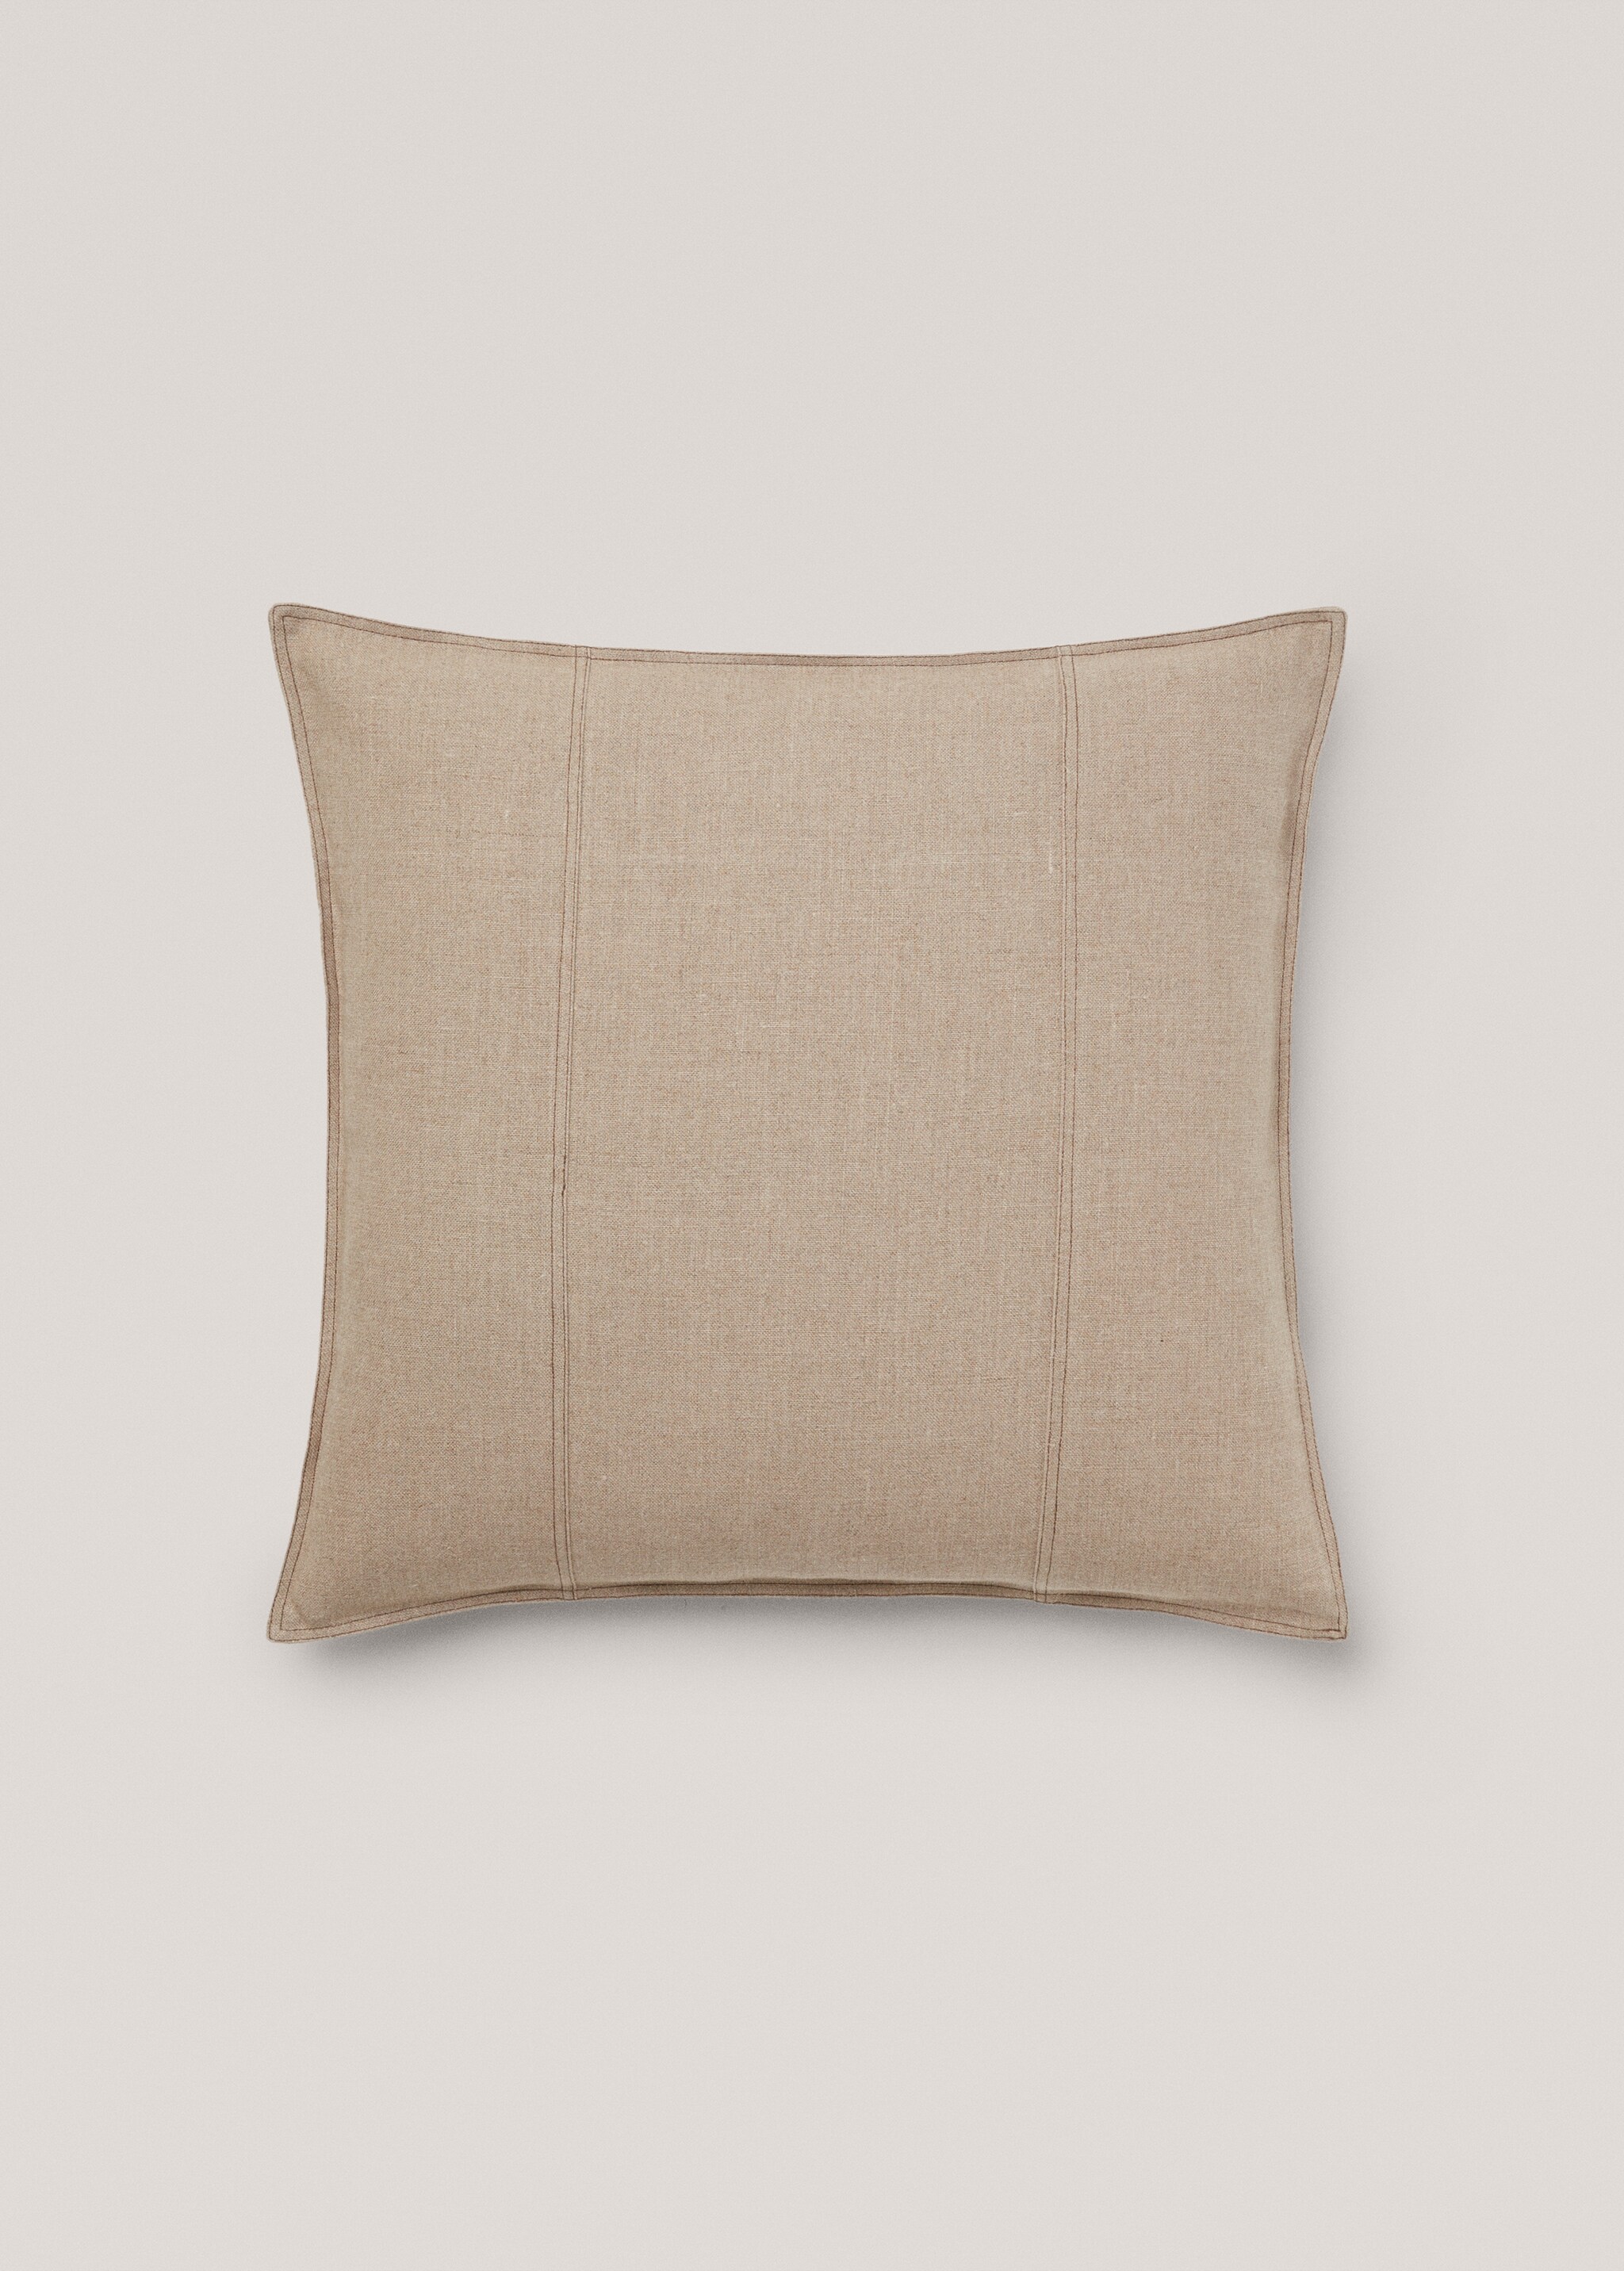 100% linen stitched cushion cover 60x60cm - Article without model